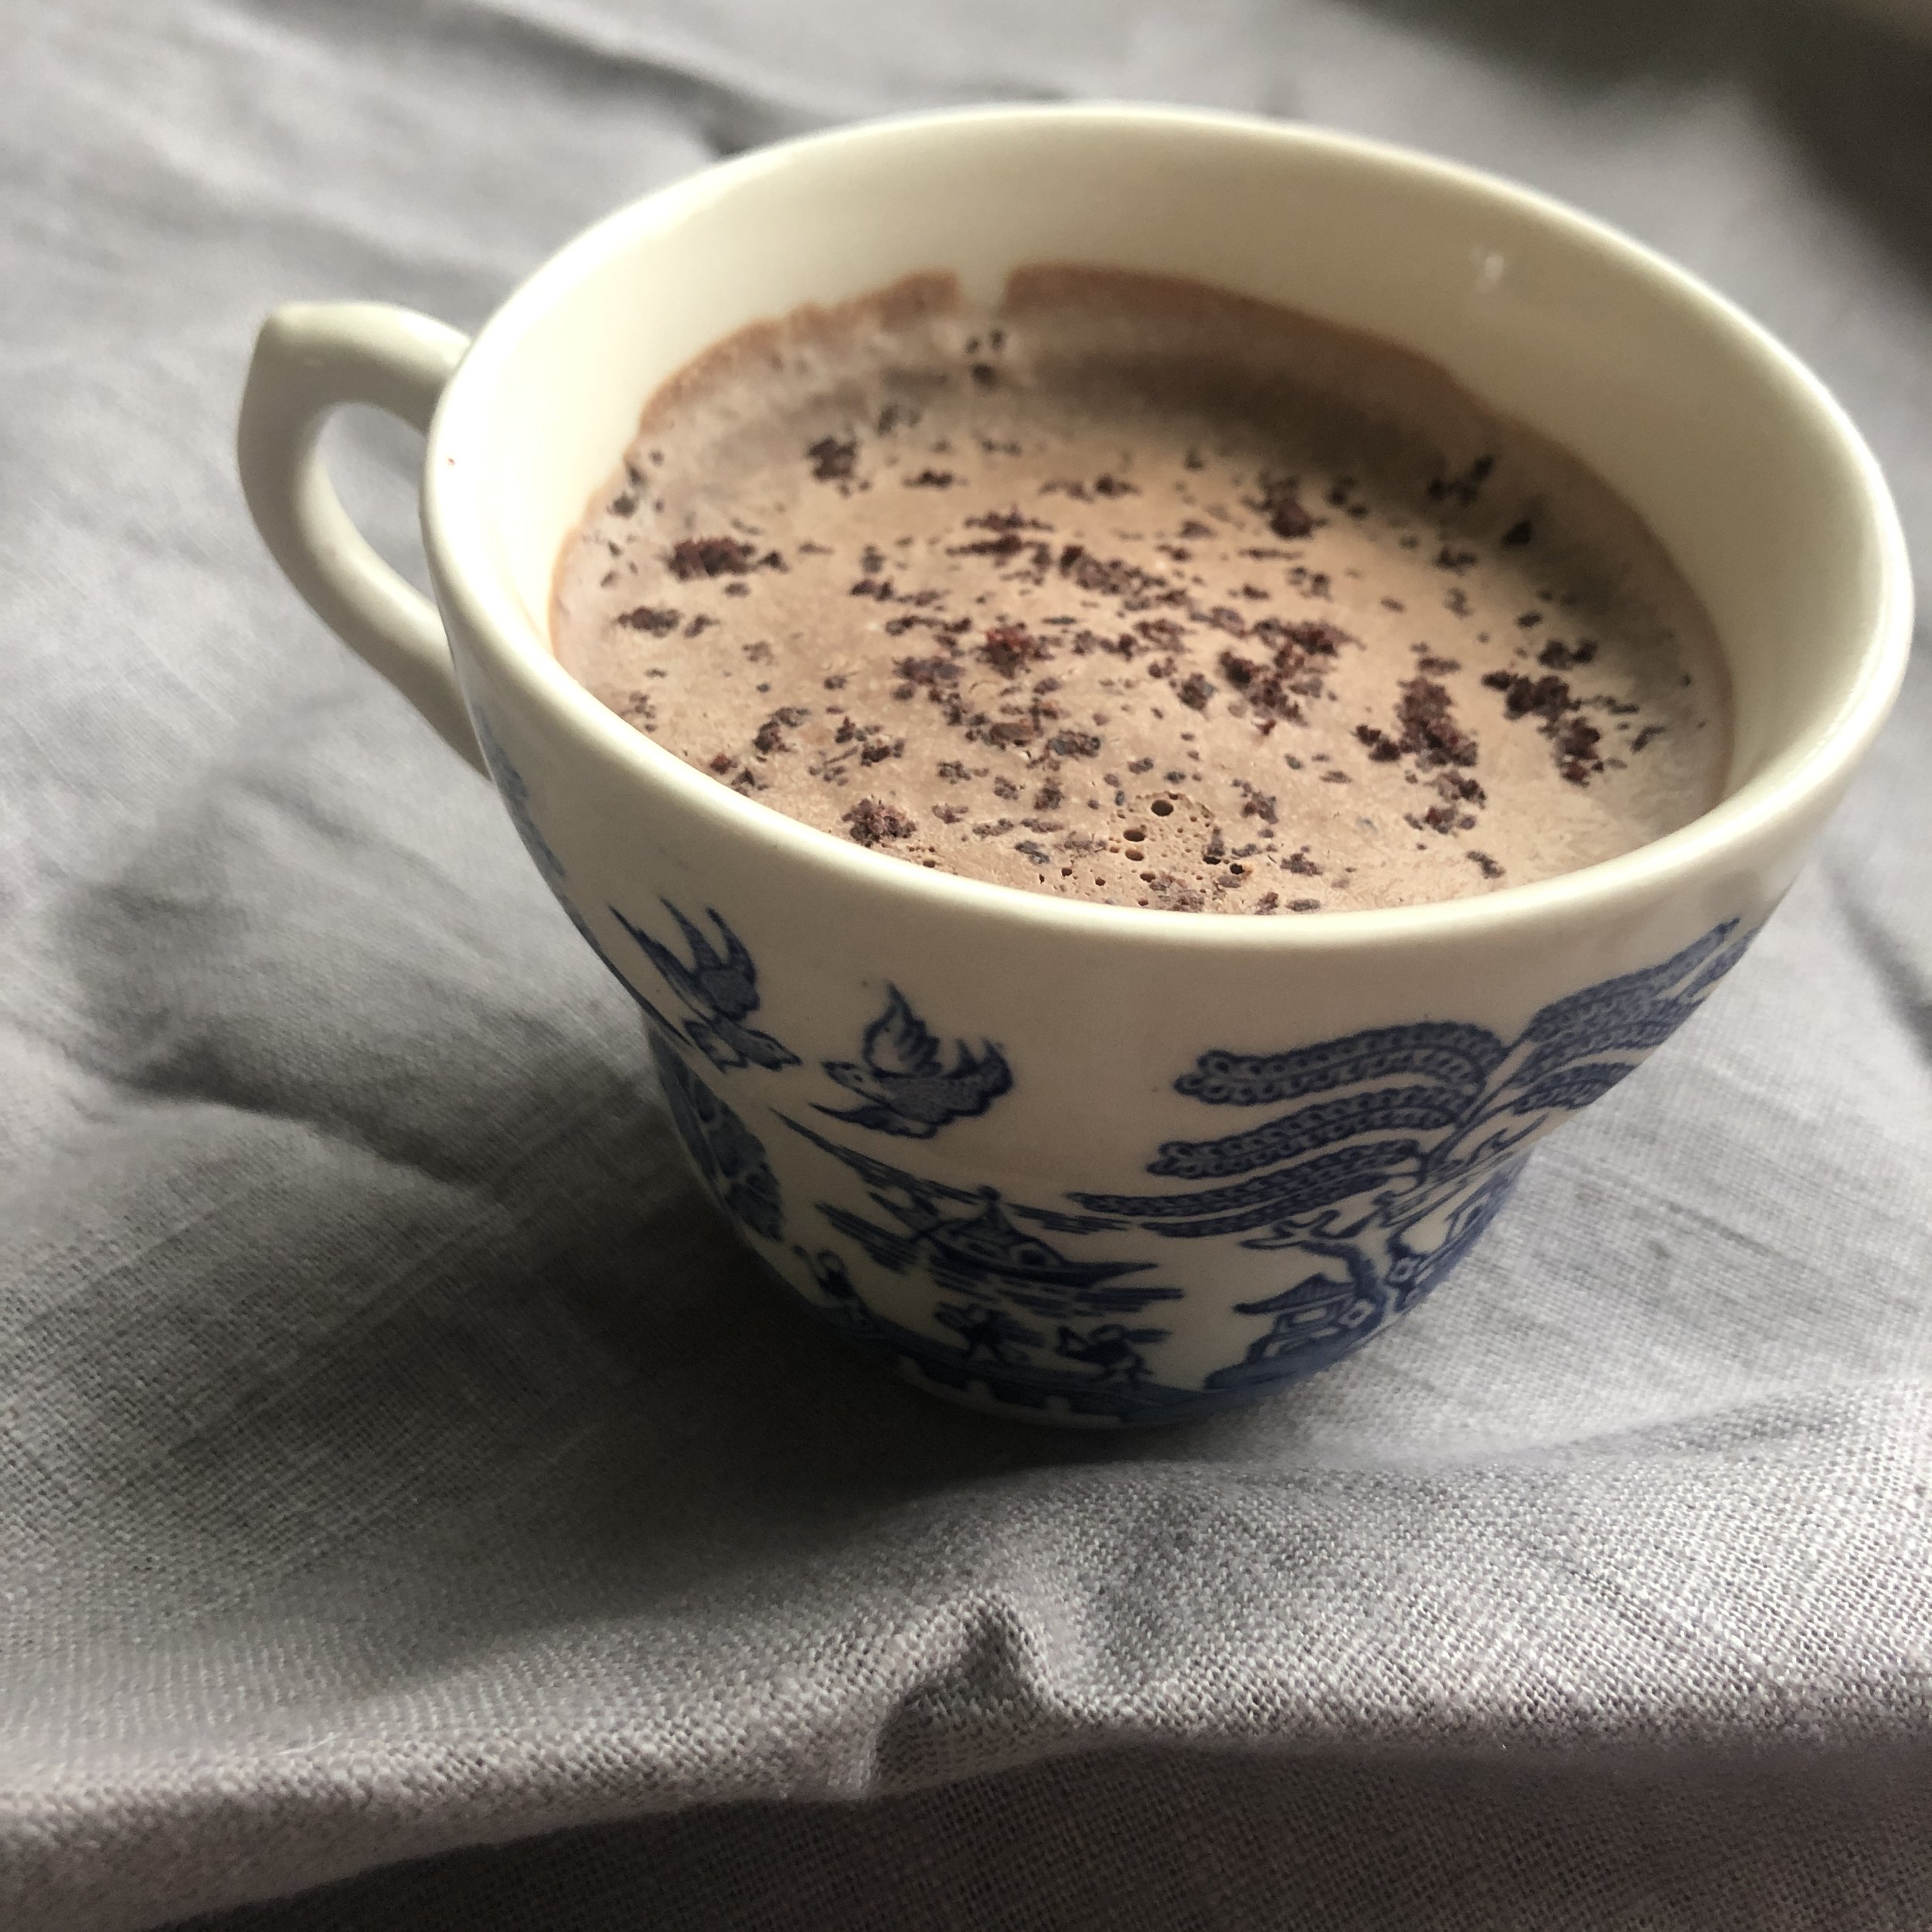 COCONUT CACAO PUDDING